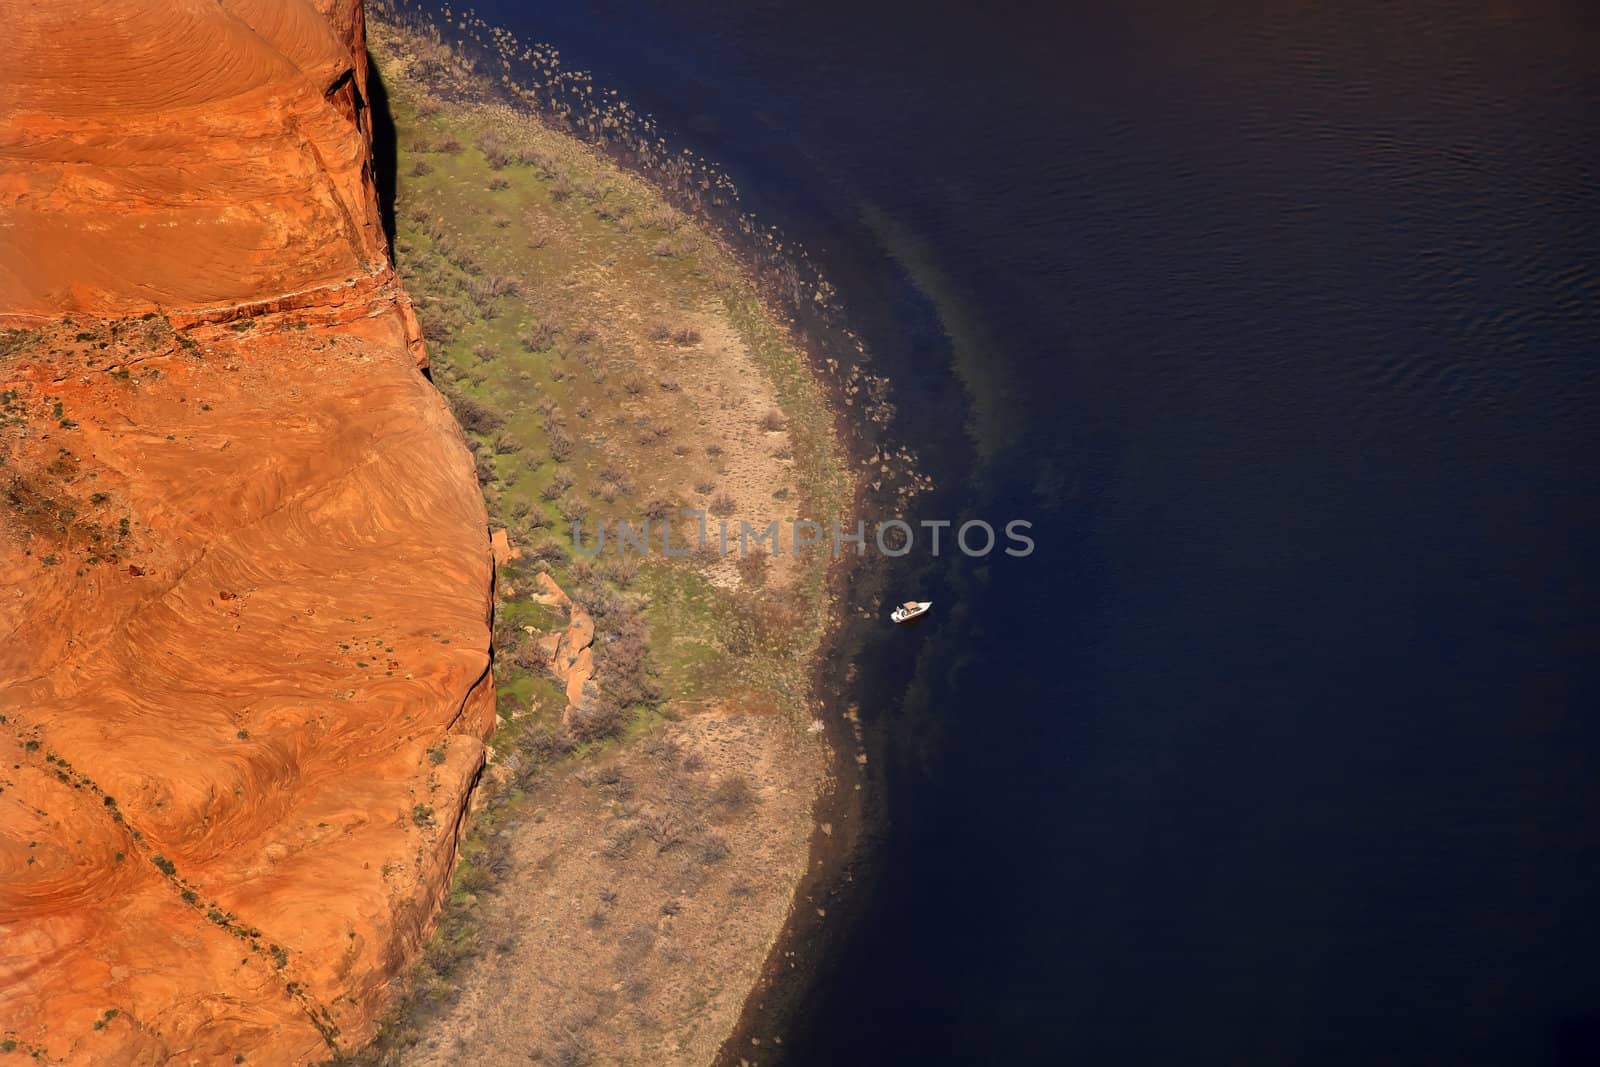 Small Fishing Boat Horseshoe Bend Glen Canyon Overlook Colorado by bill_perry